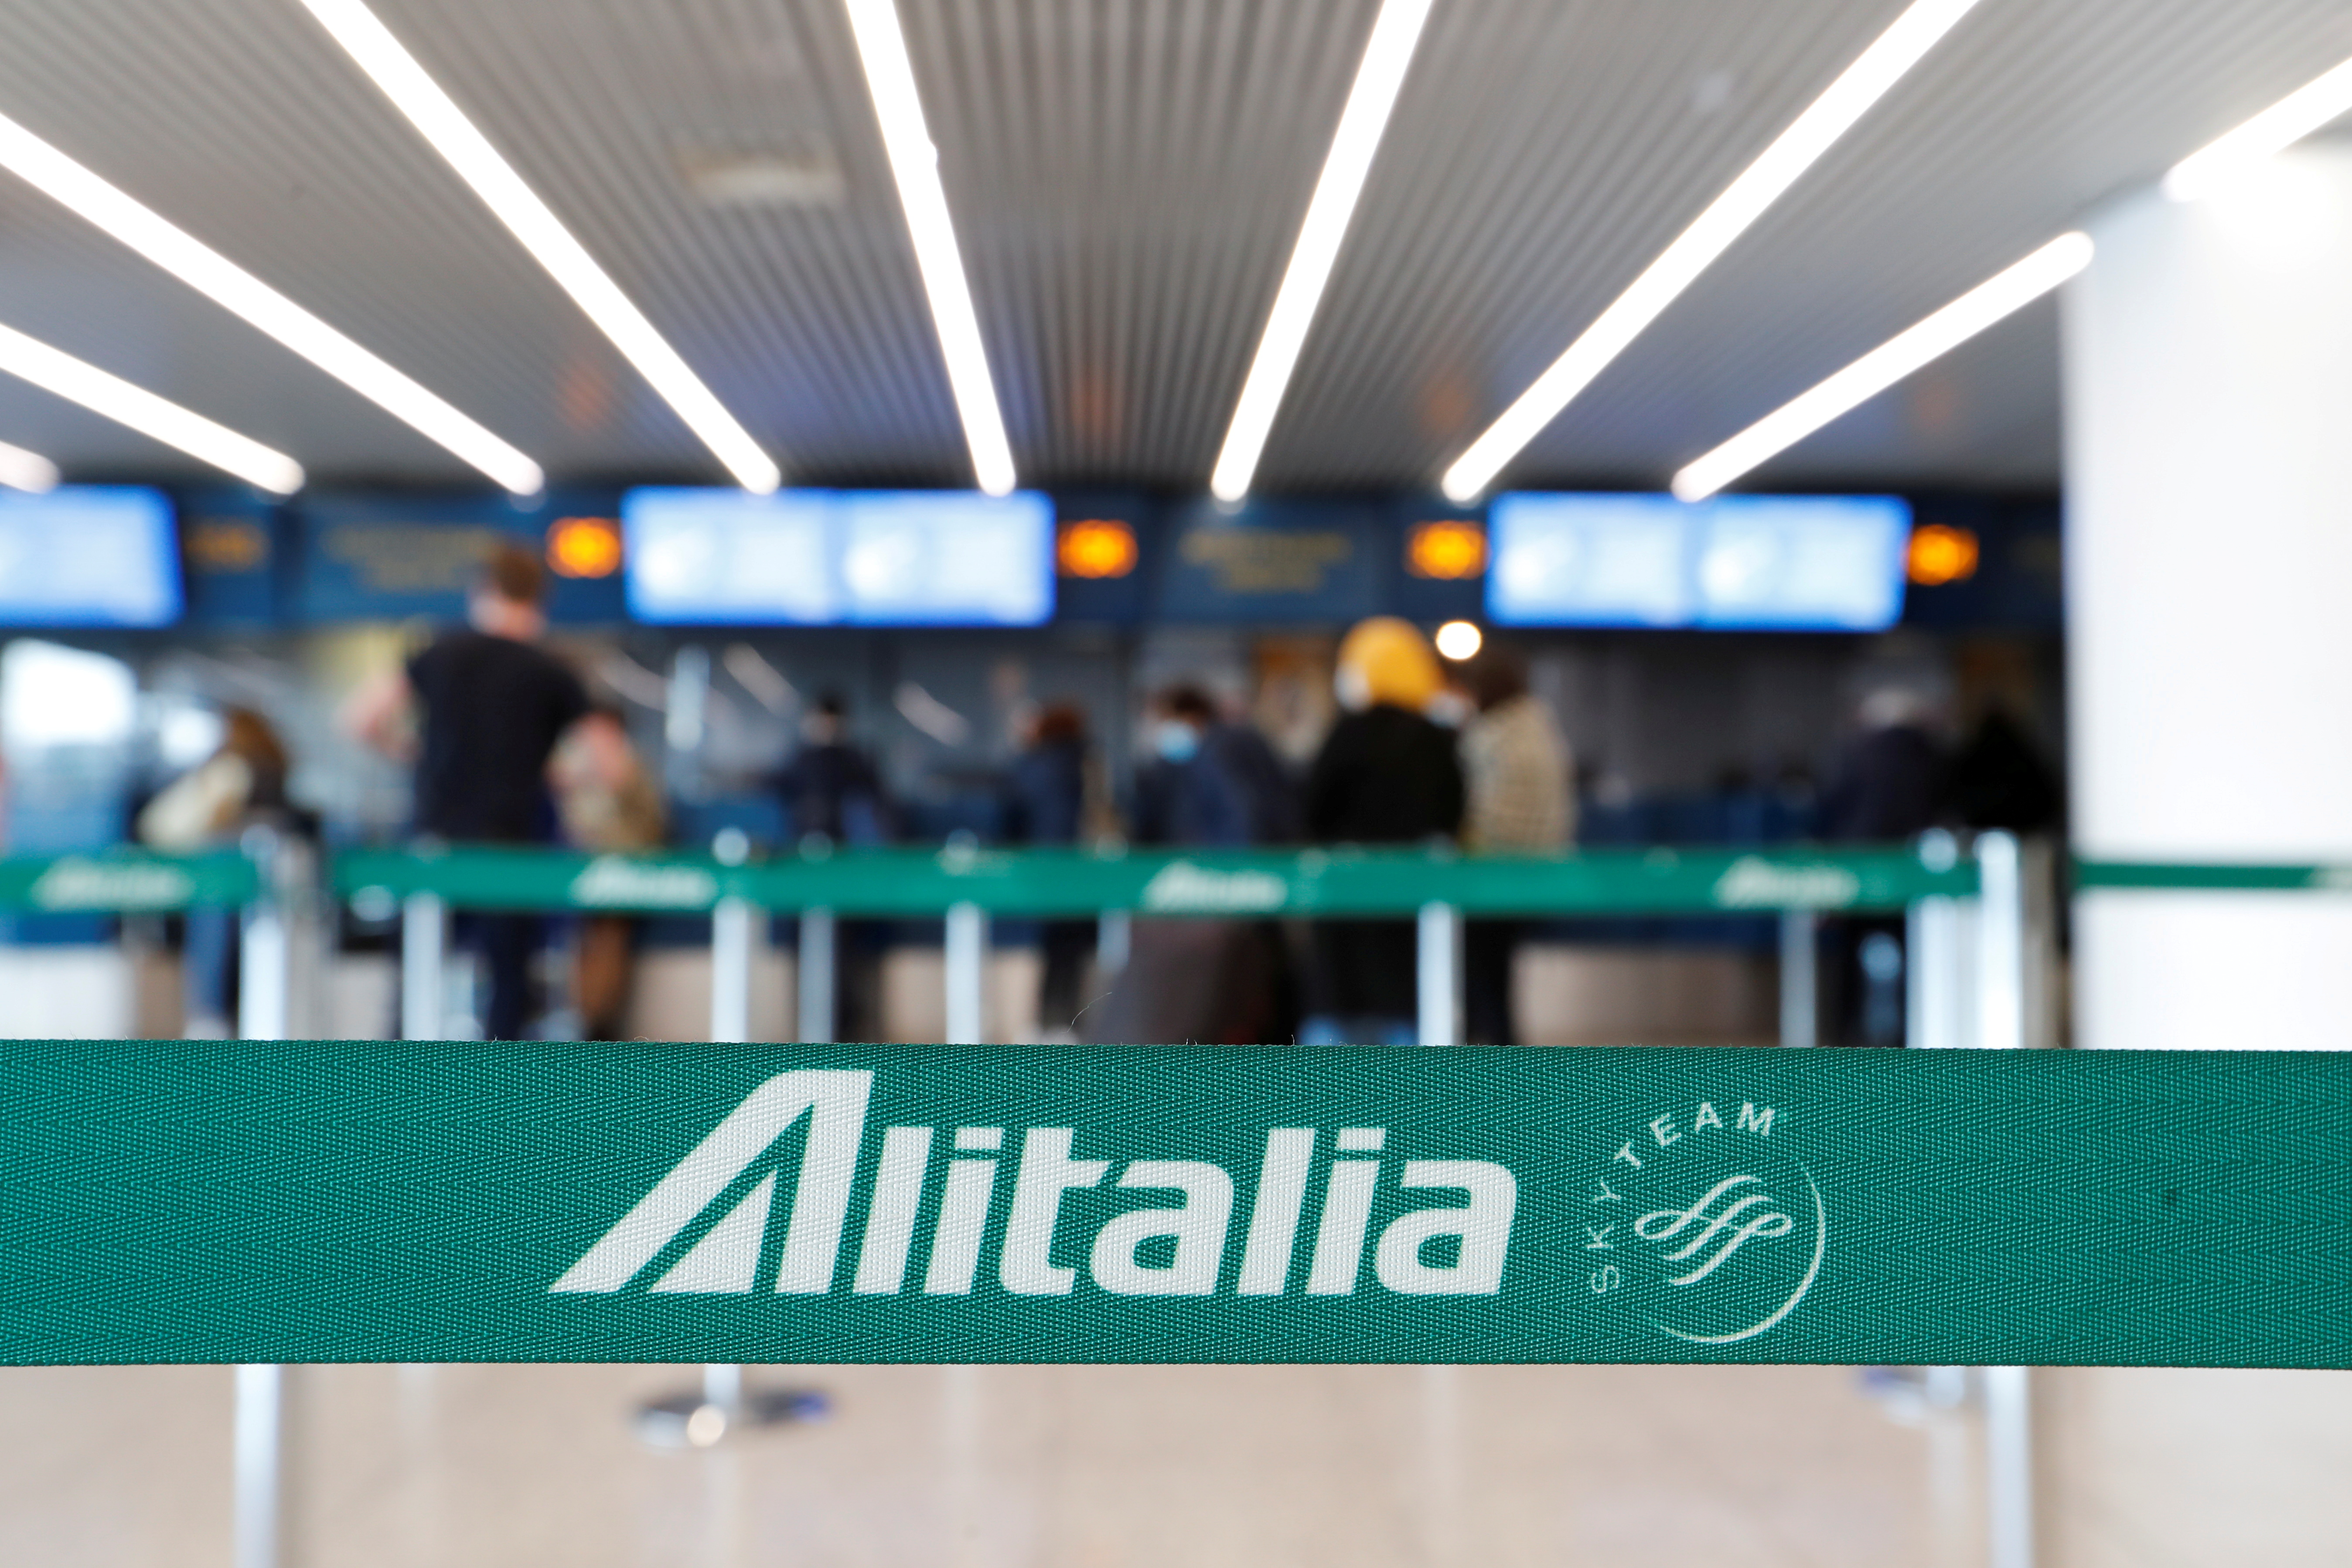 View of the Alitalia check-in counter at Fiumicino International Airport in Rome